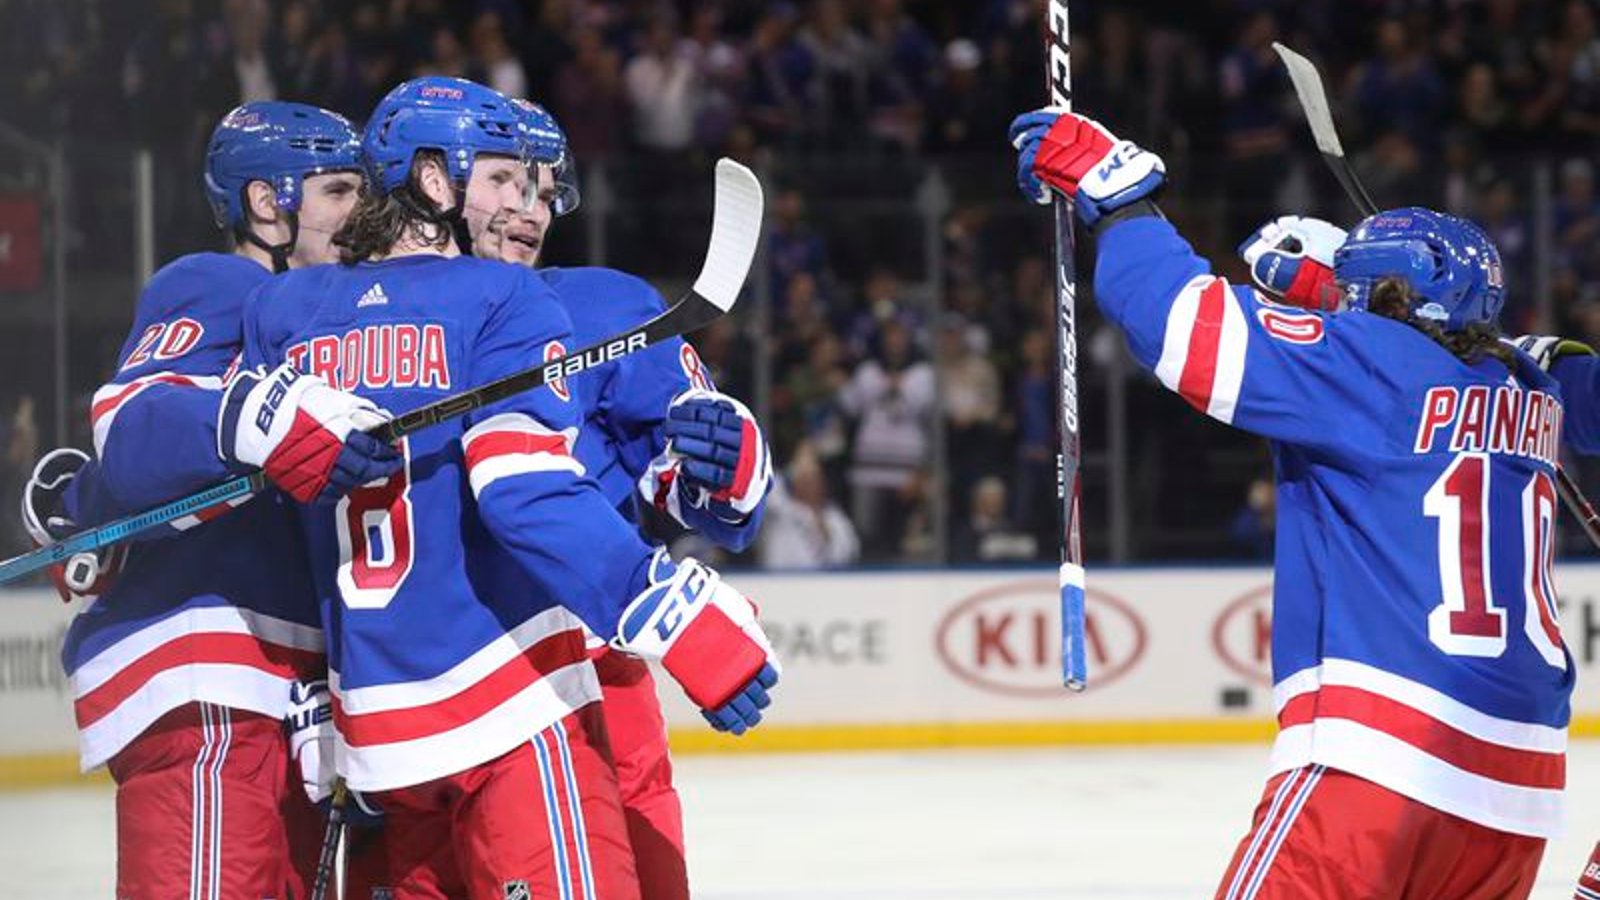 Rangers appear ready to new captain in New York 